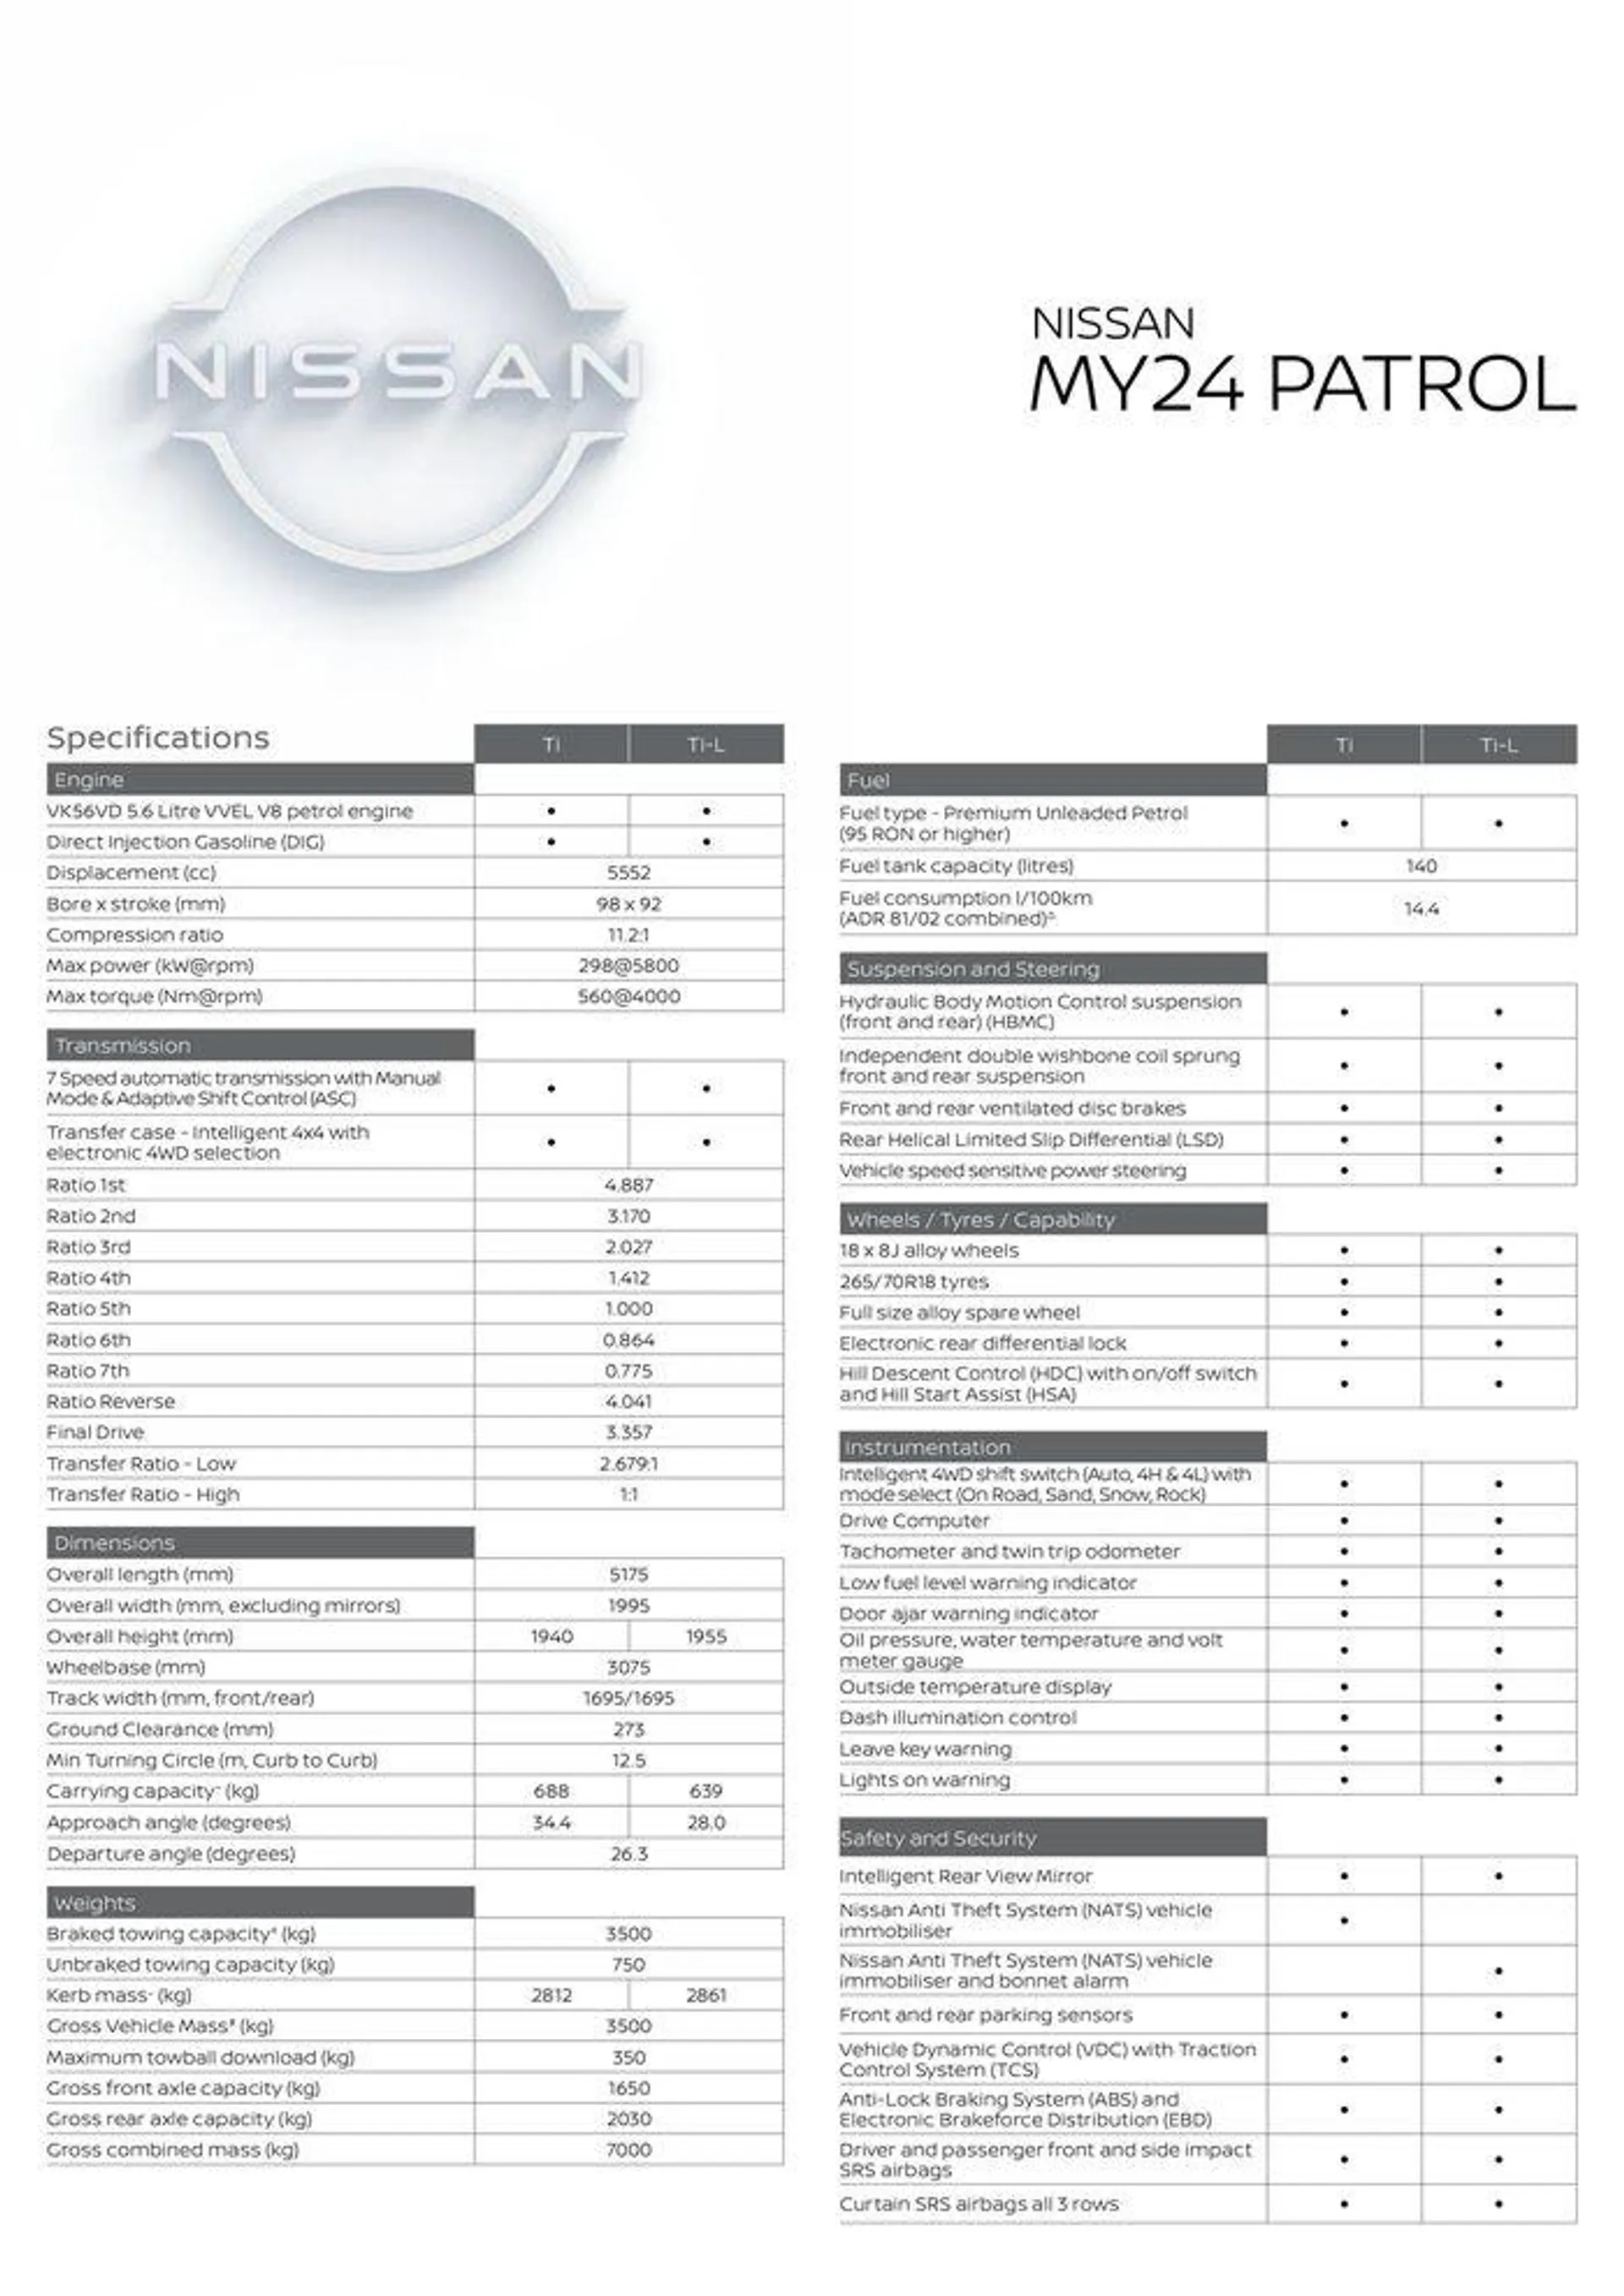 Nissan MY24 Patrol Specification Sheets - 1